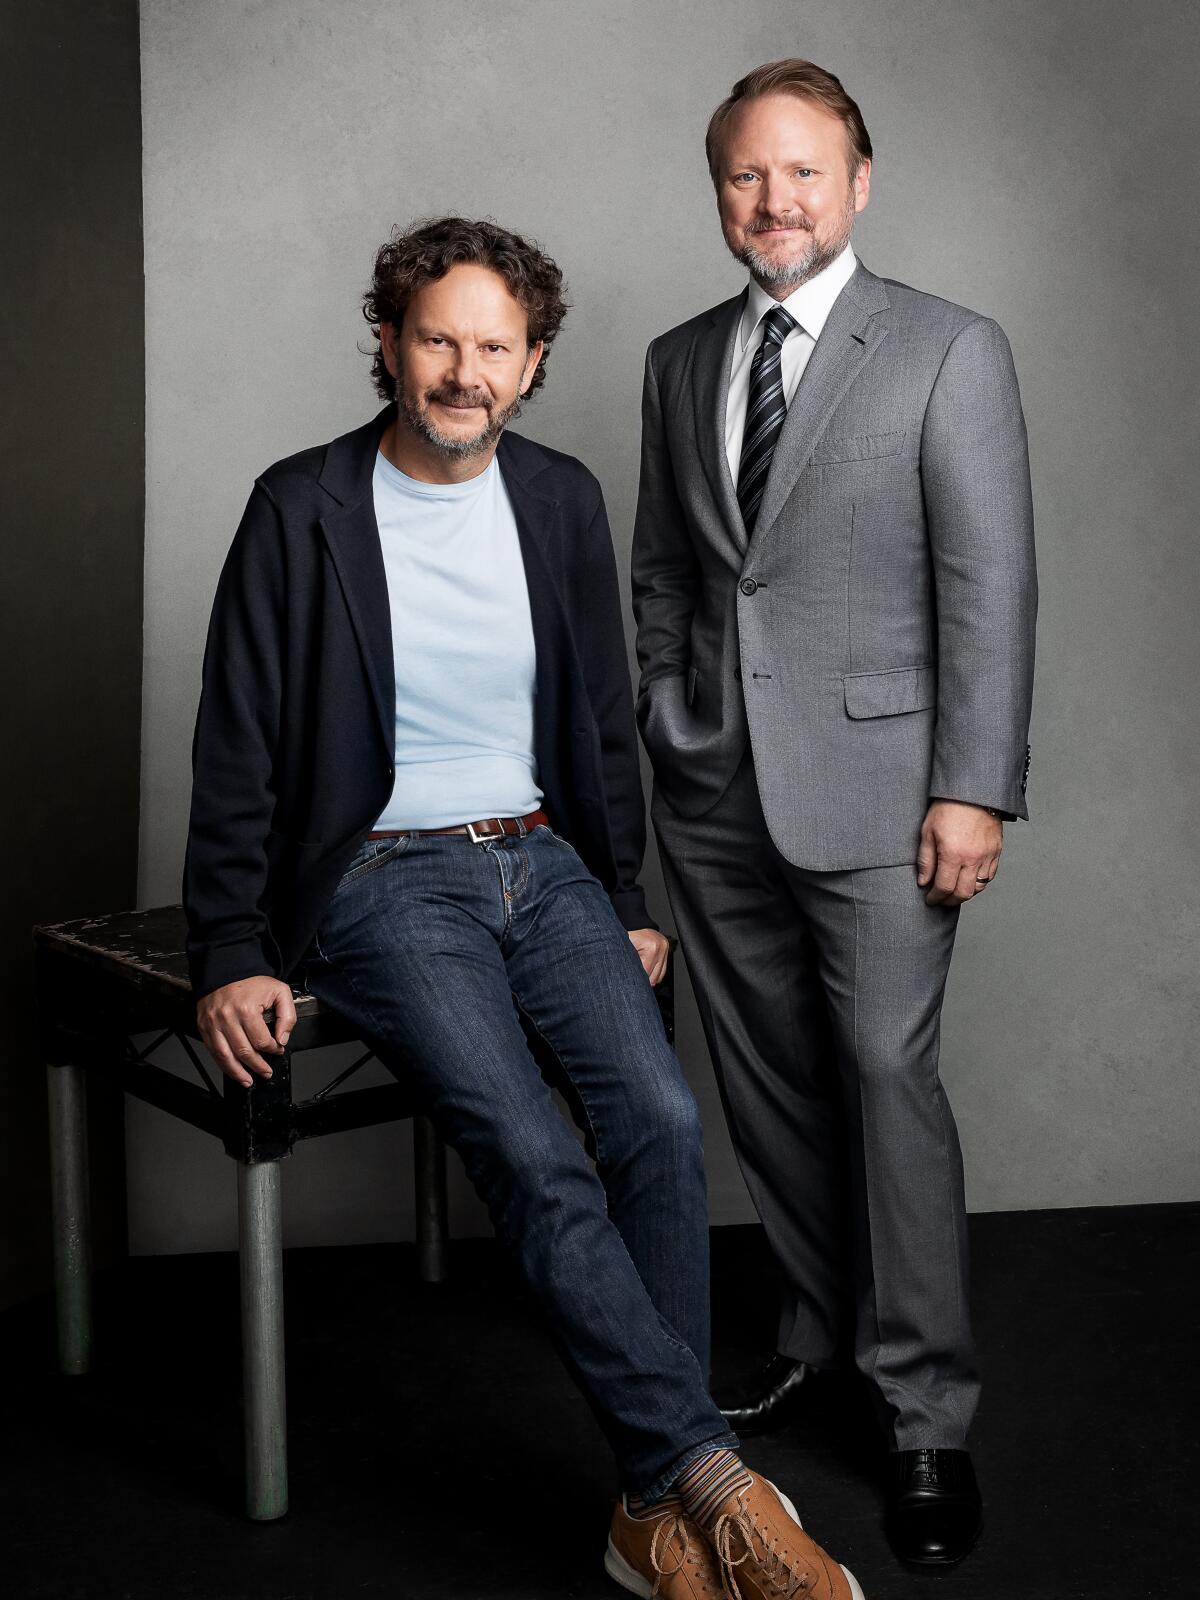 Ram Bergman sits on a stool as Rian Johnson, in a suit, stands next to him for a portrait.